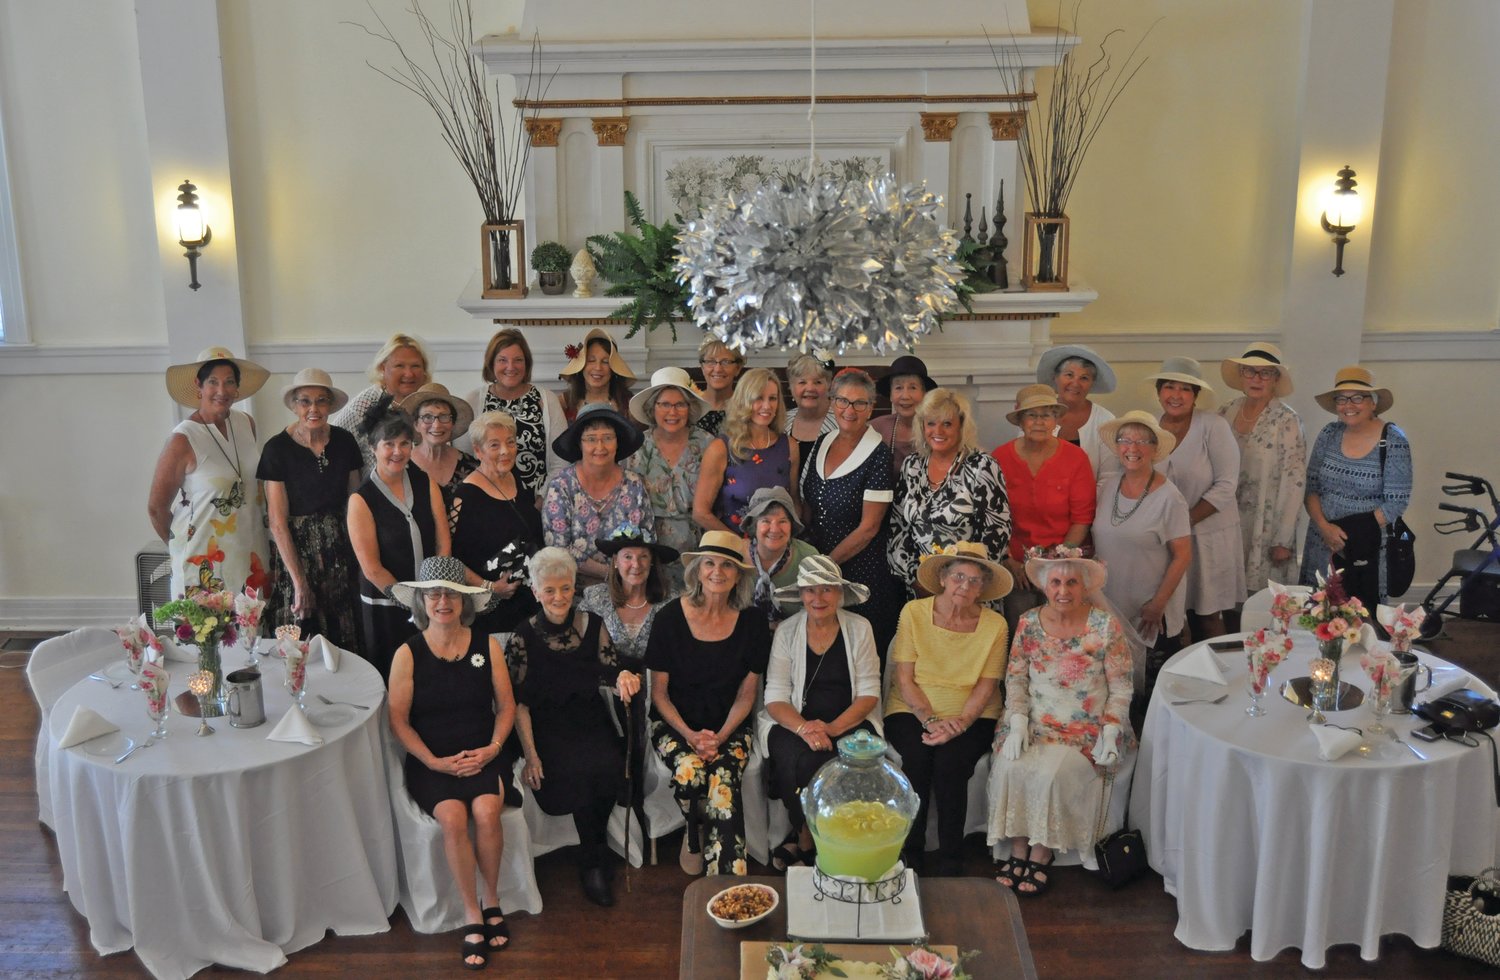 Members of the Flower Lovers Garden Club gather for a 100th anniversary celebration at the Masonic Cornerstone Grand Hall and Event Center on Wednesday.